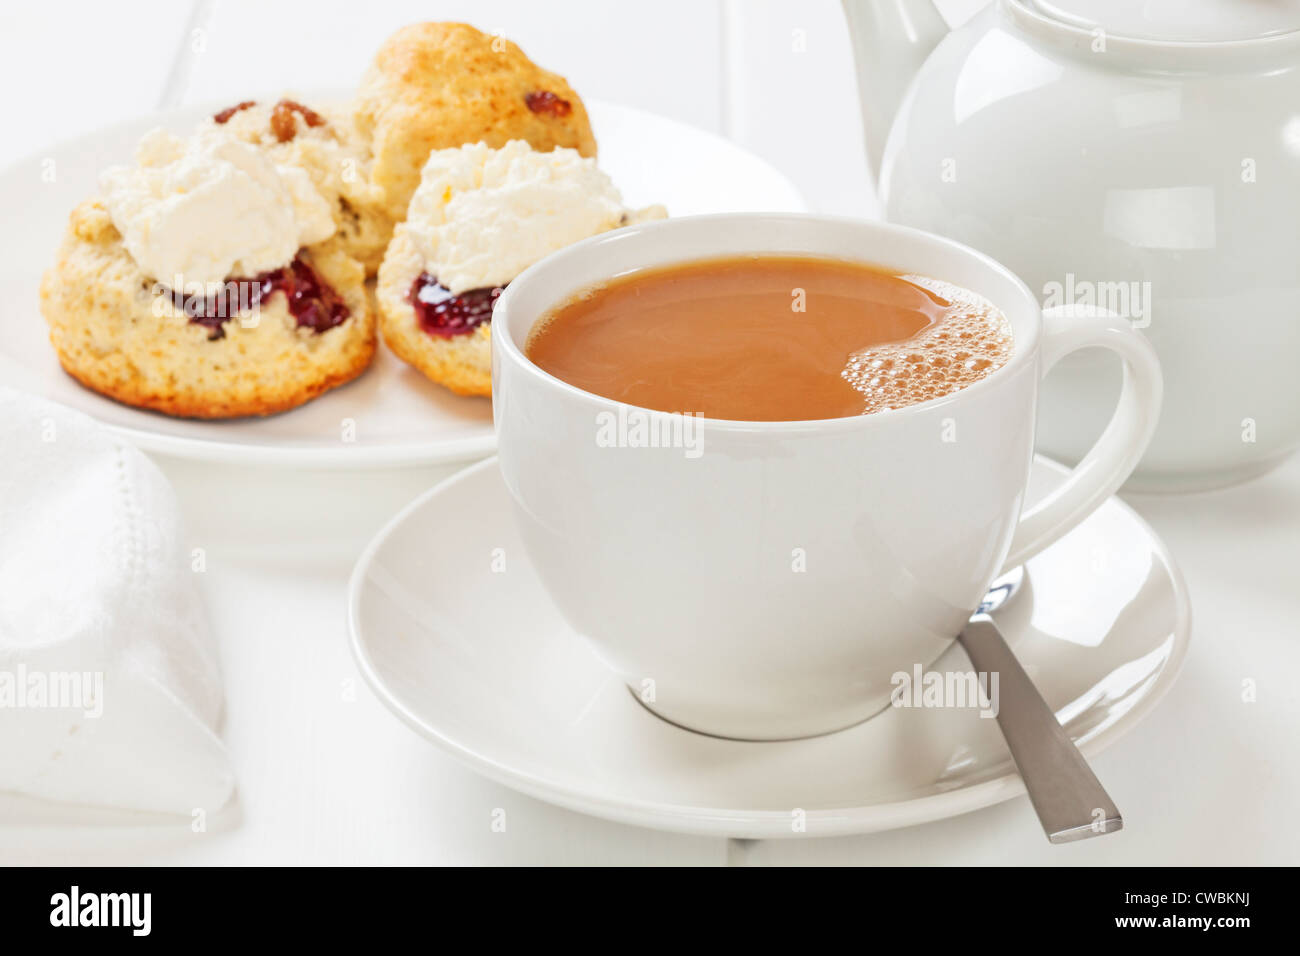 A cup of tea with scones, jam and cream. Stock Photo